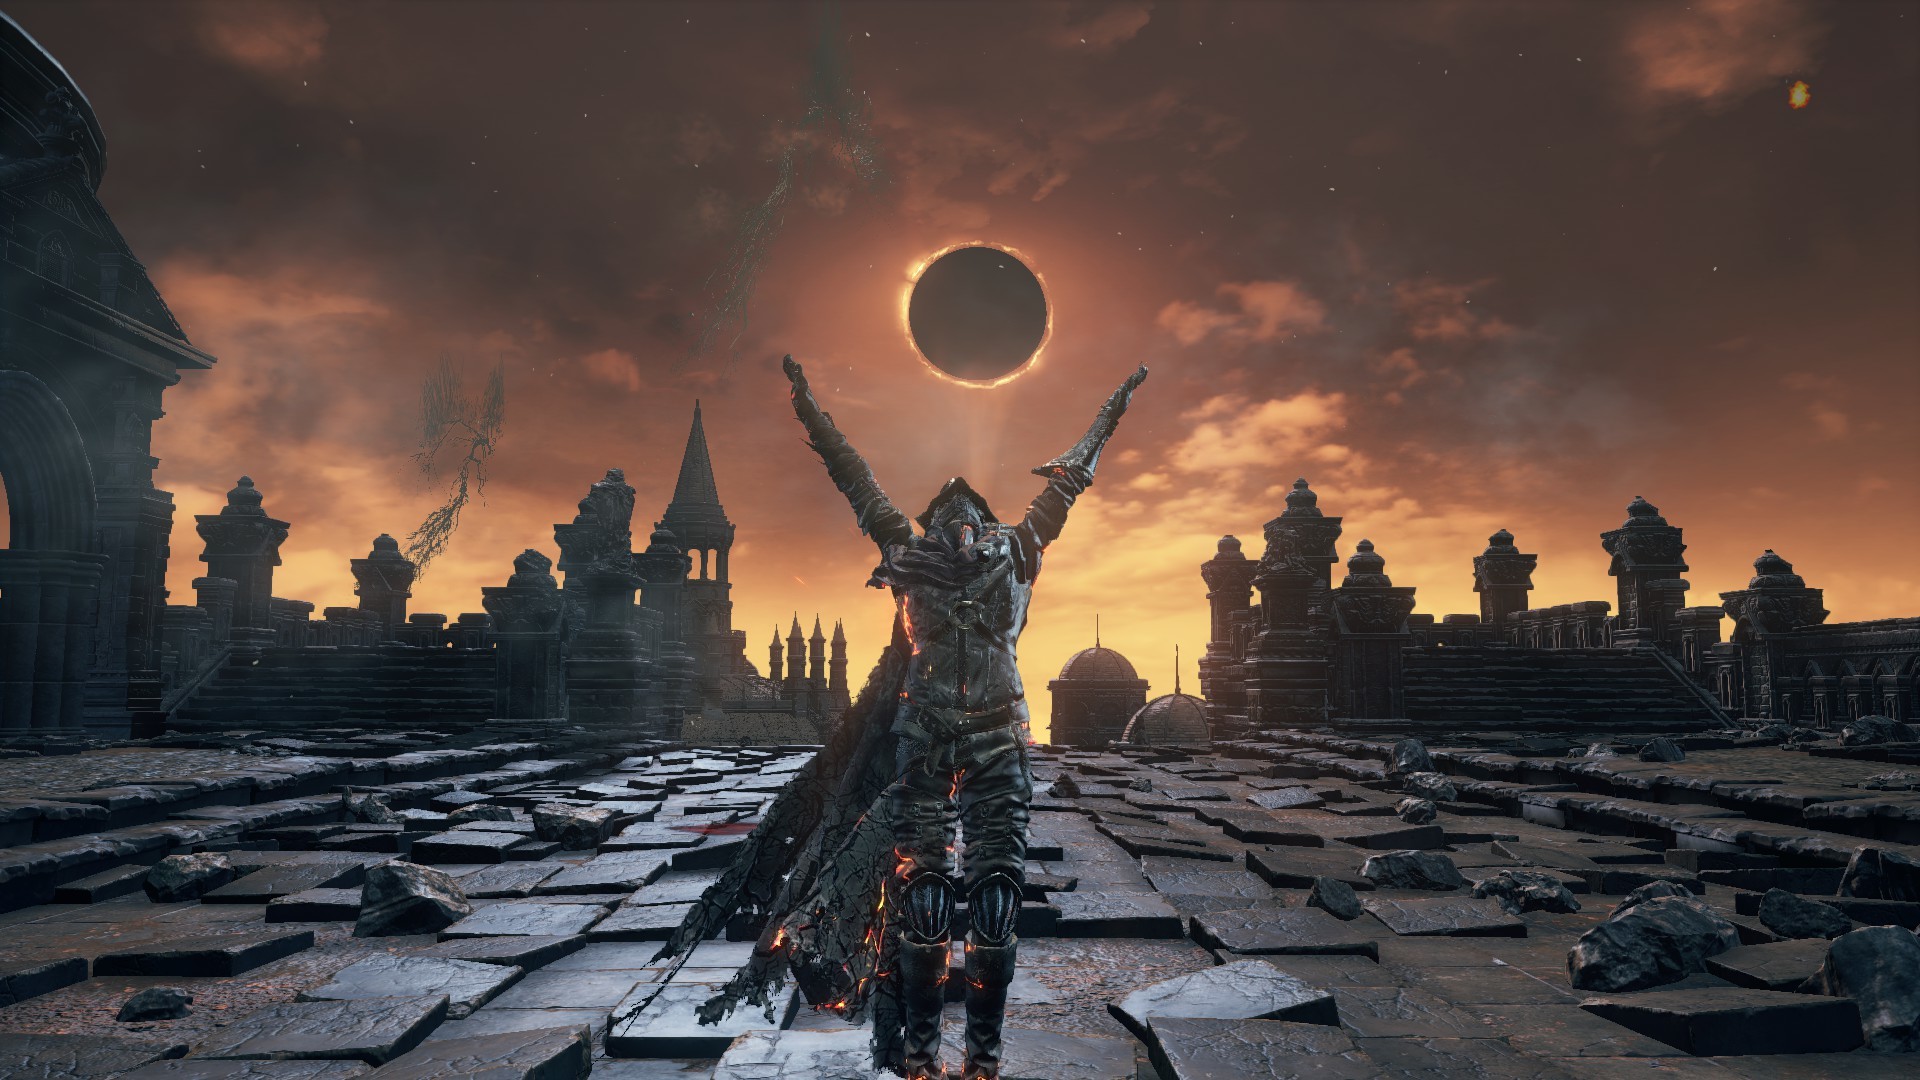 praise the sun wallpaper,action adventure game,pc game,strategy video game,cg artwork,games